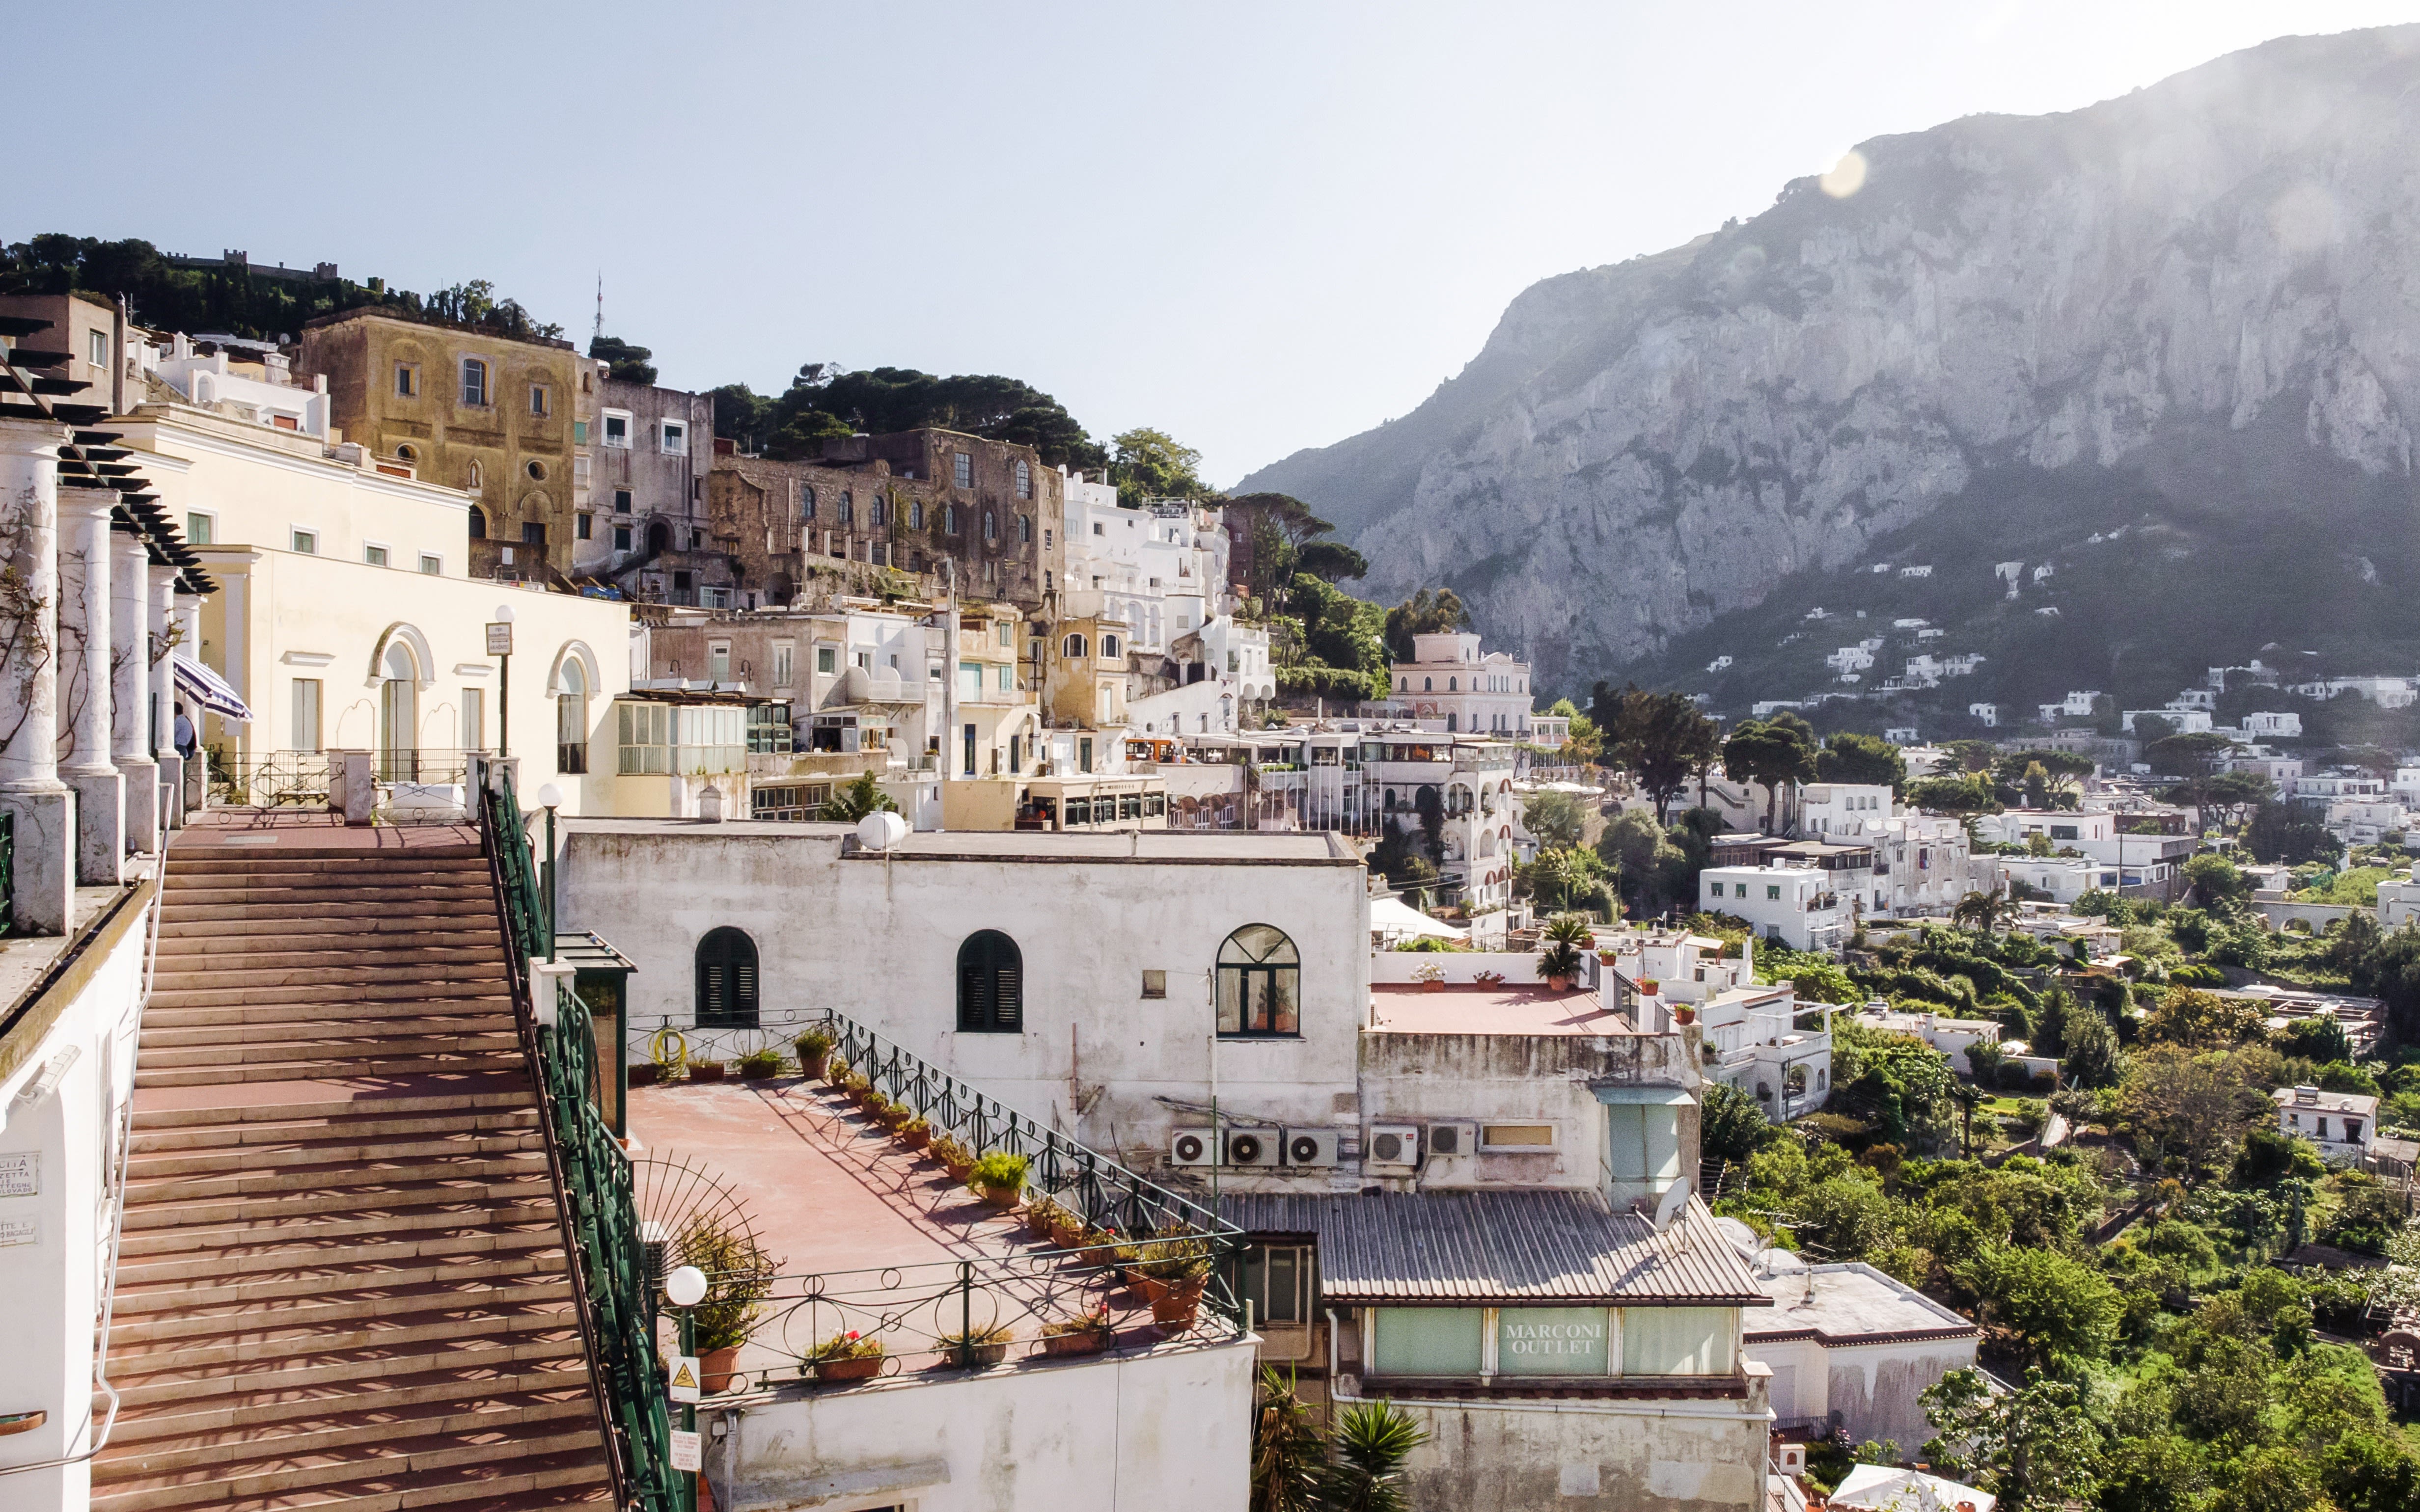 Image of steps up to houses in the hills of the Italian Island of Capri.